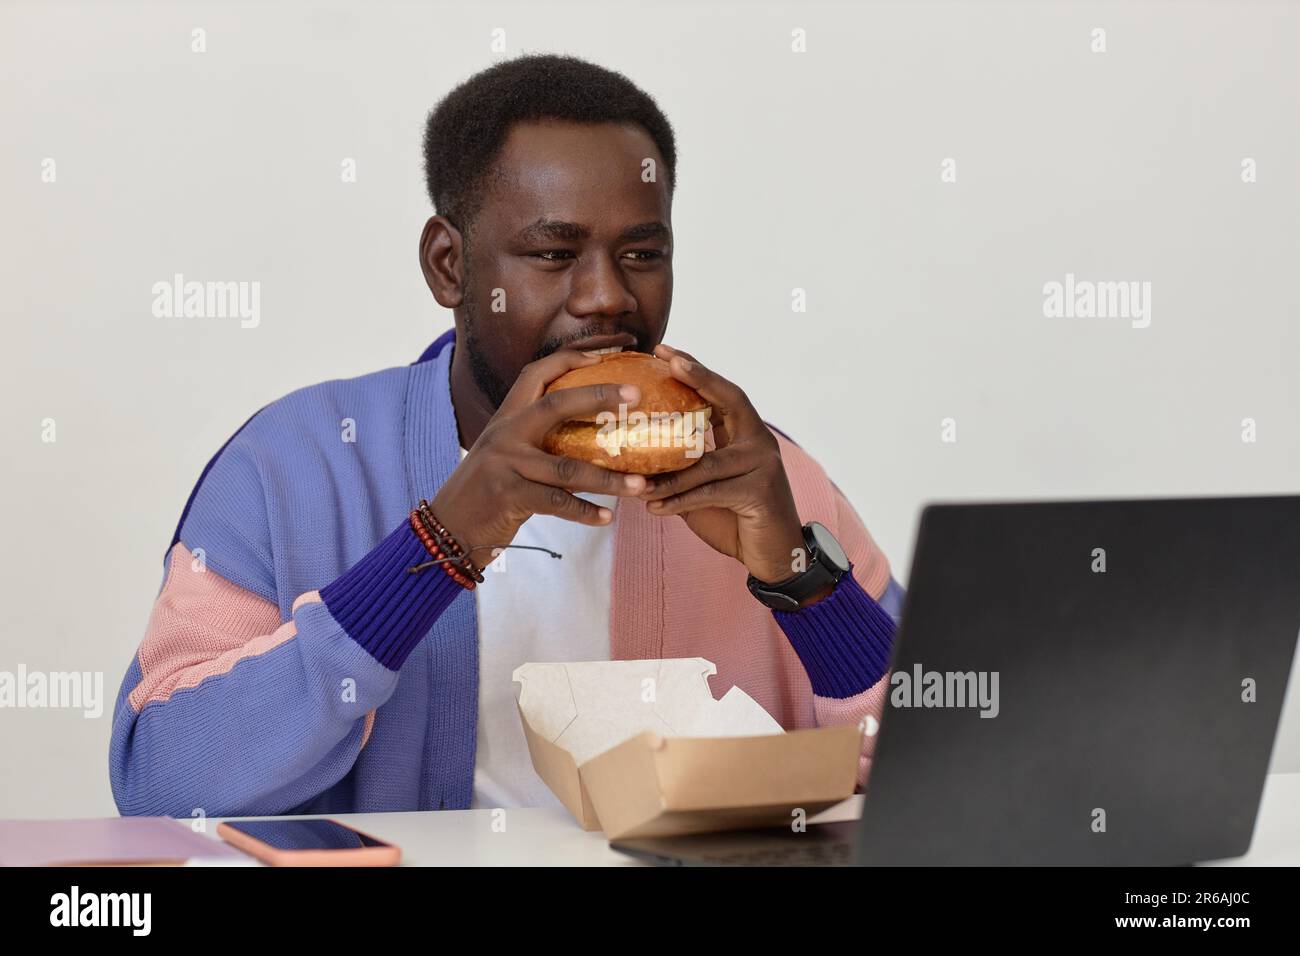 Portrait of young black man eating takeout burger at workplace in office against white wall, copy space Stock Photo